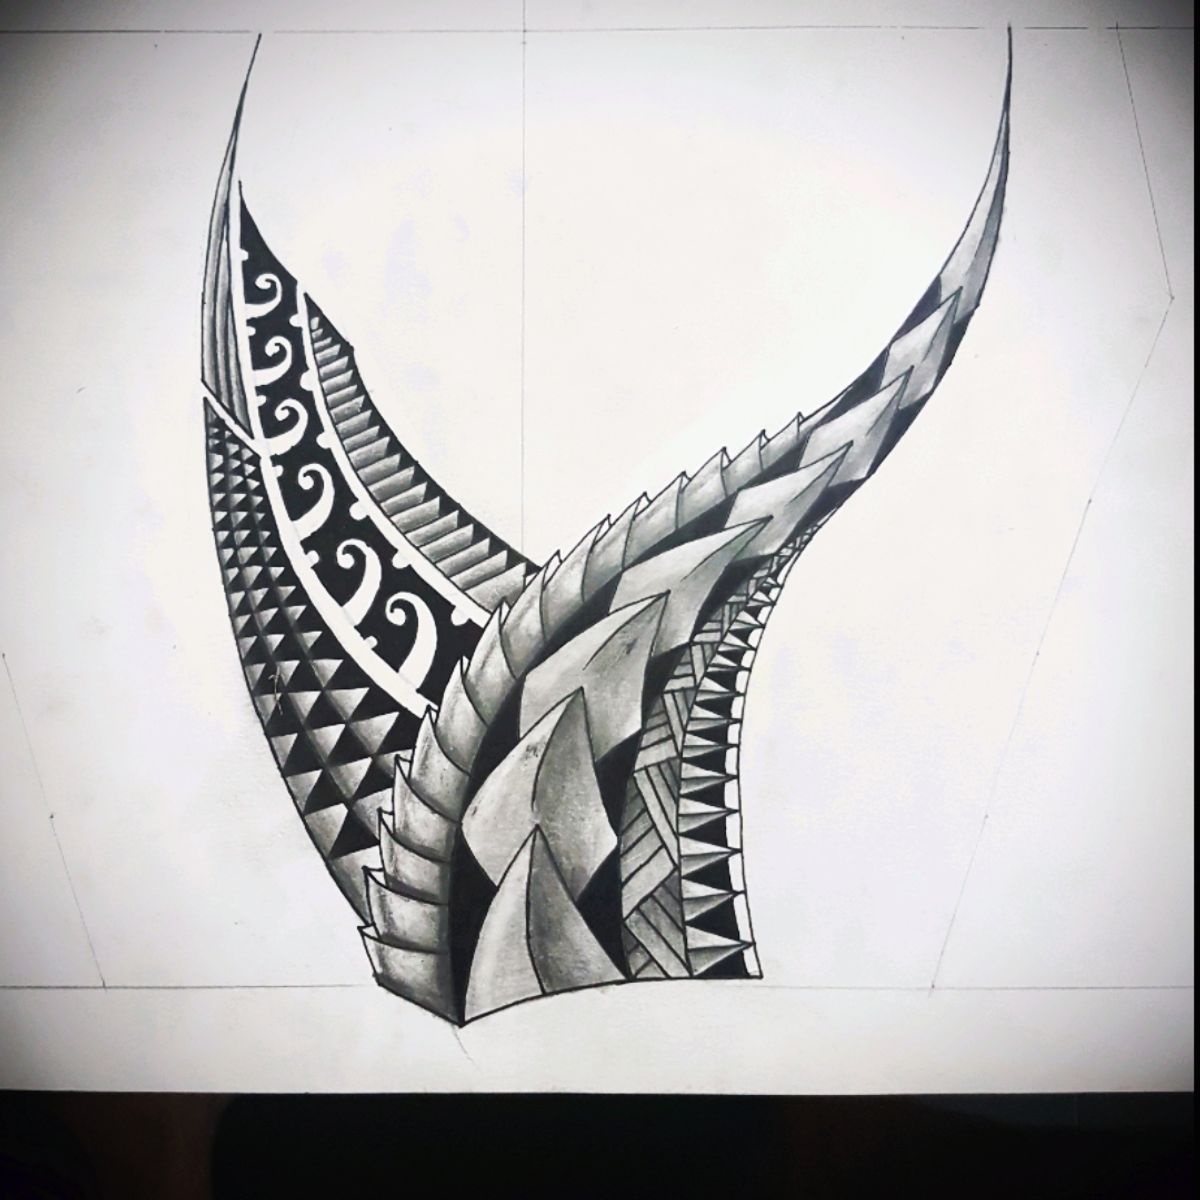 Tattoo uploaded by Valeanu Vlad • Design done for a cover. #tribal # ...